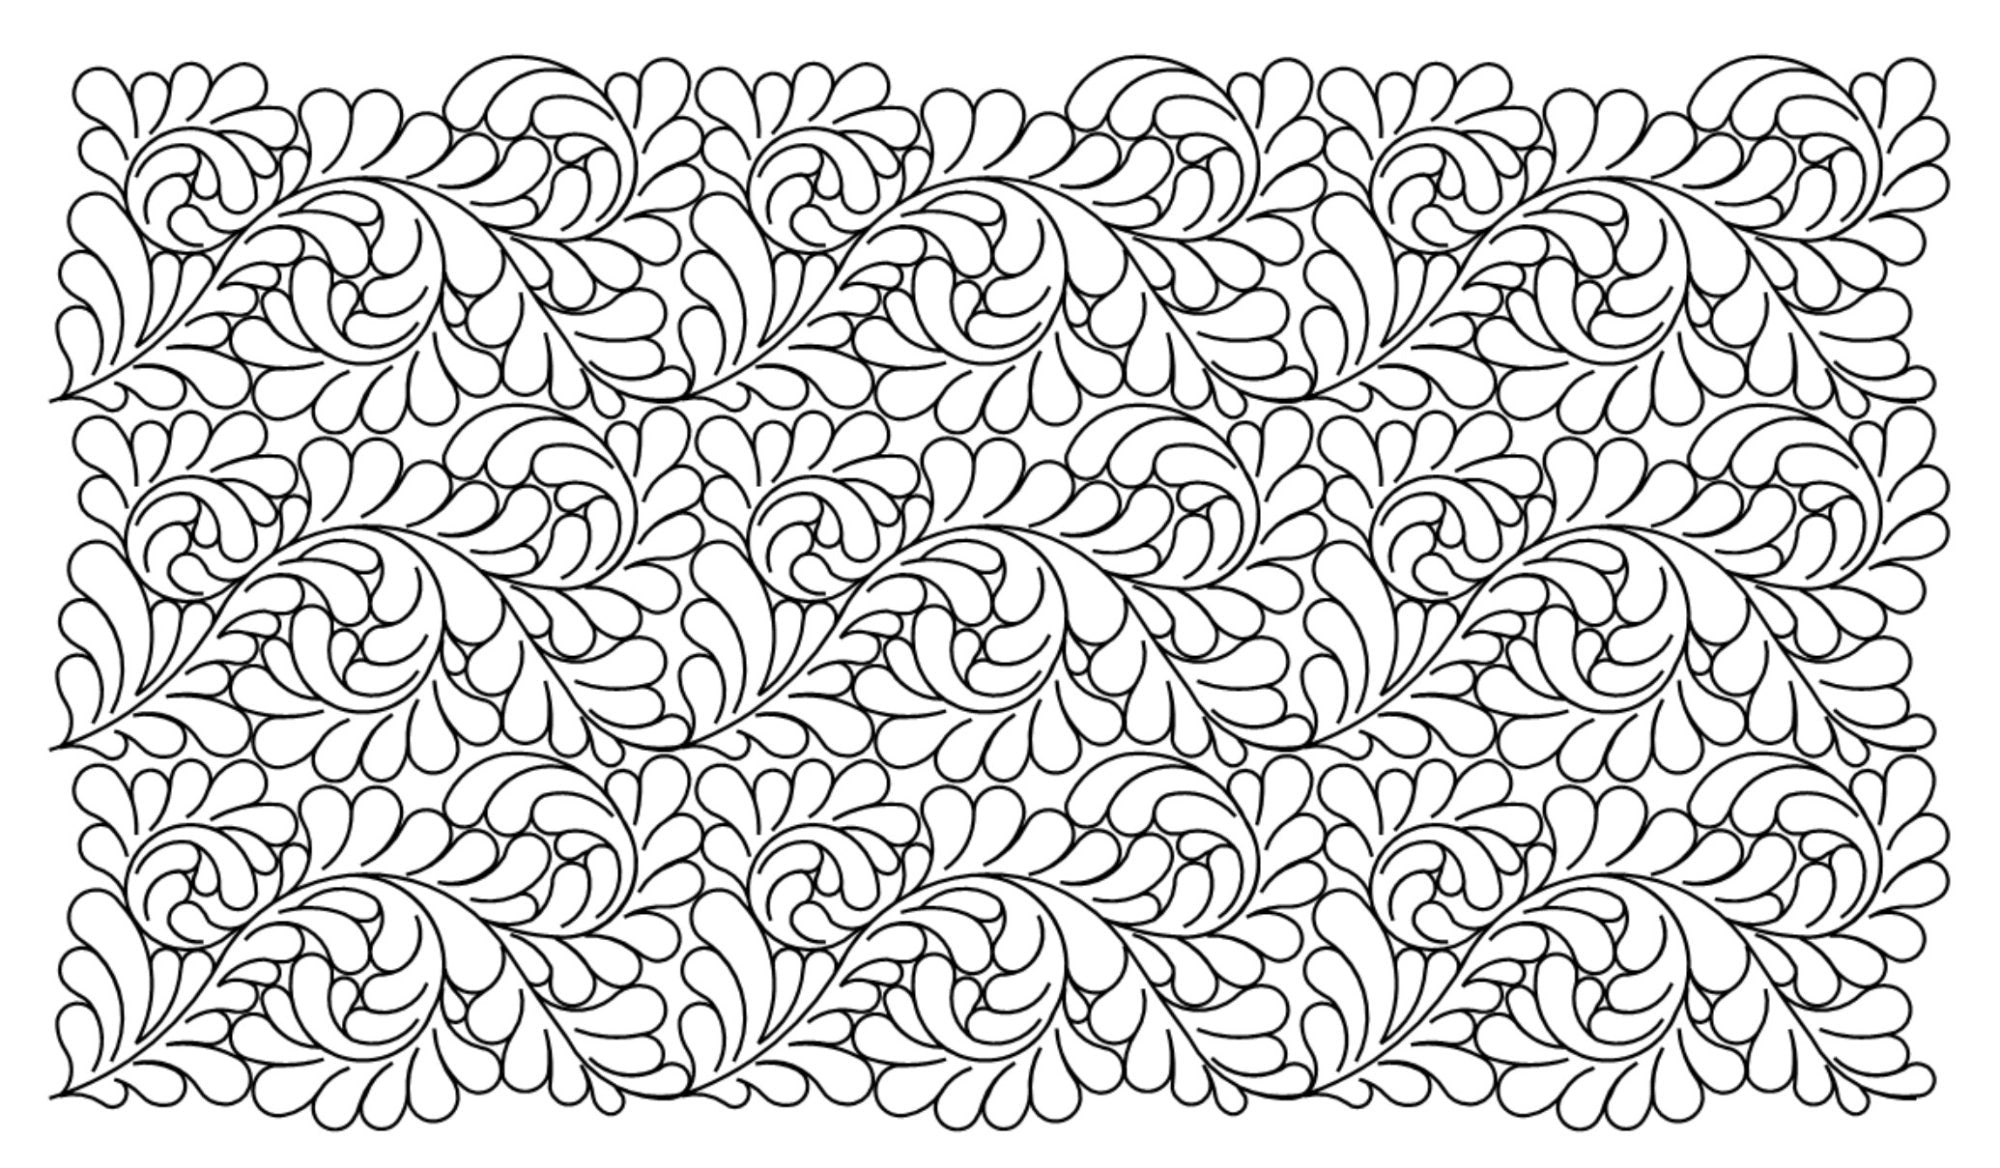 Full Feathers Digital E2E Wildflower Quilting Pantograph